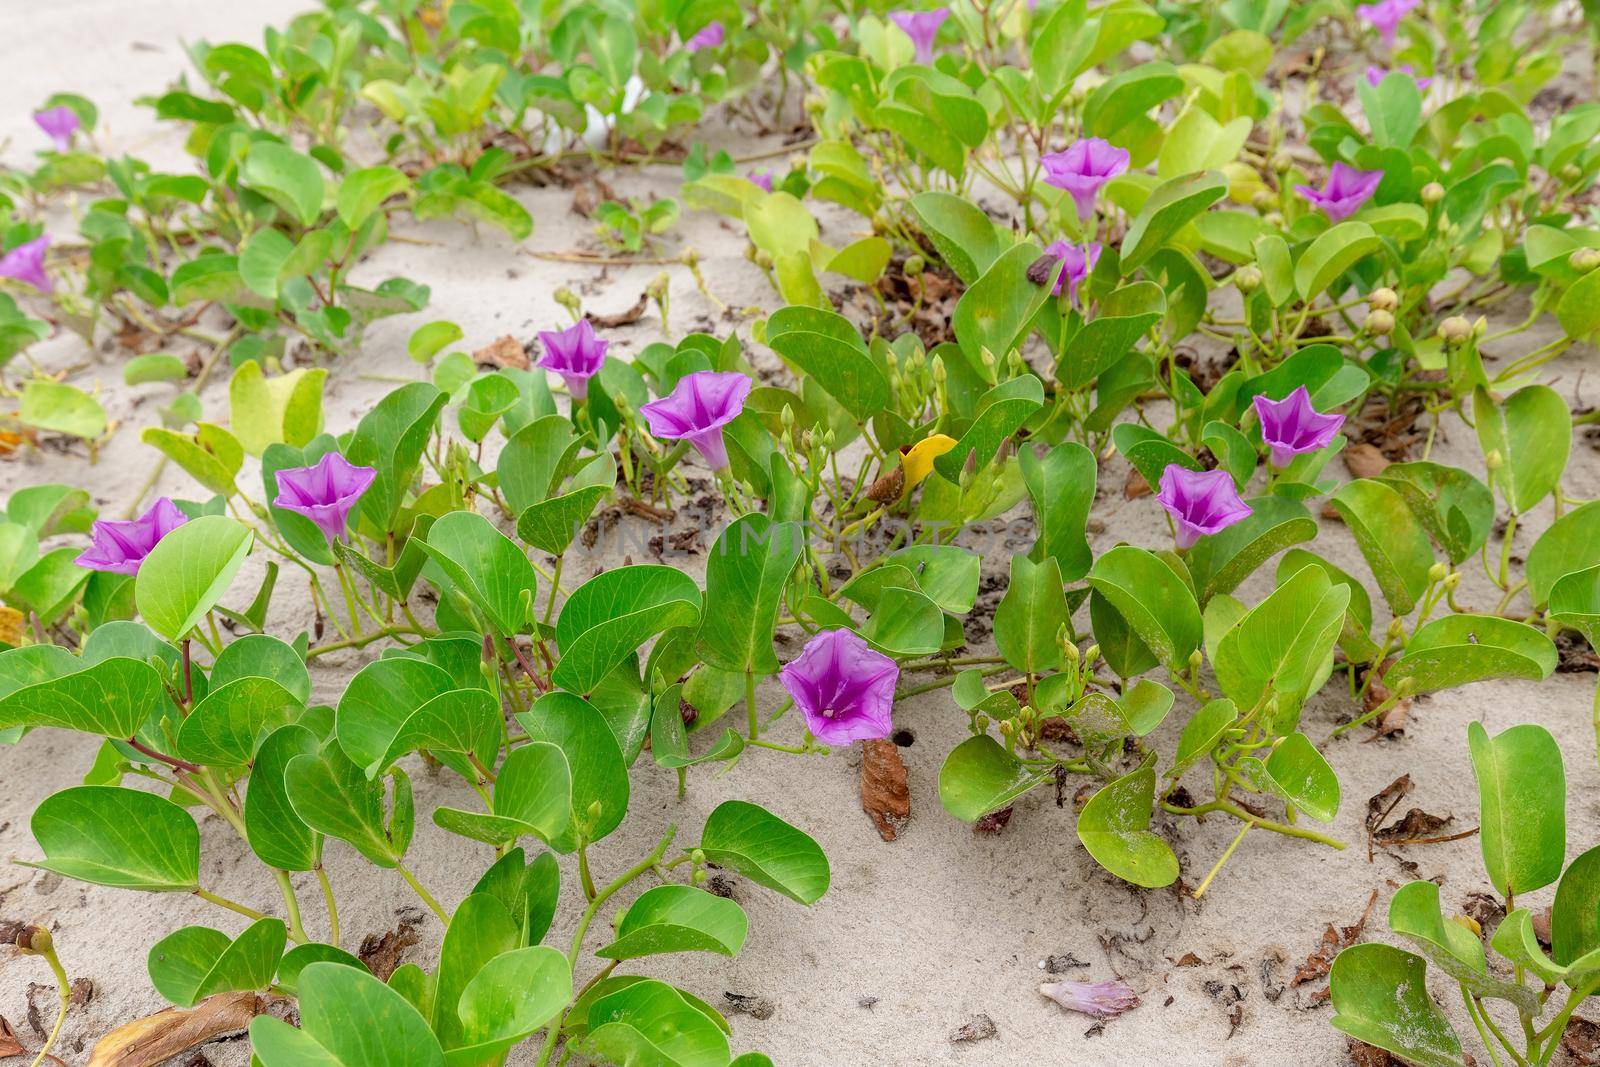 Ipomoea pes-caprae, known as bayhops, It grows on the upper parts of beaches and endures salted air